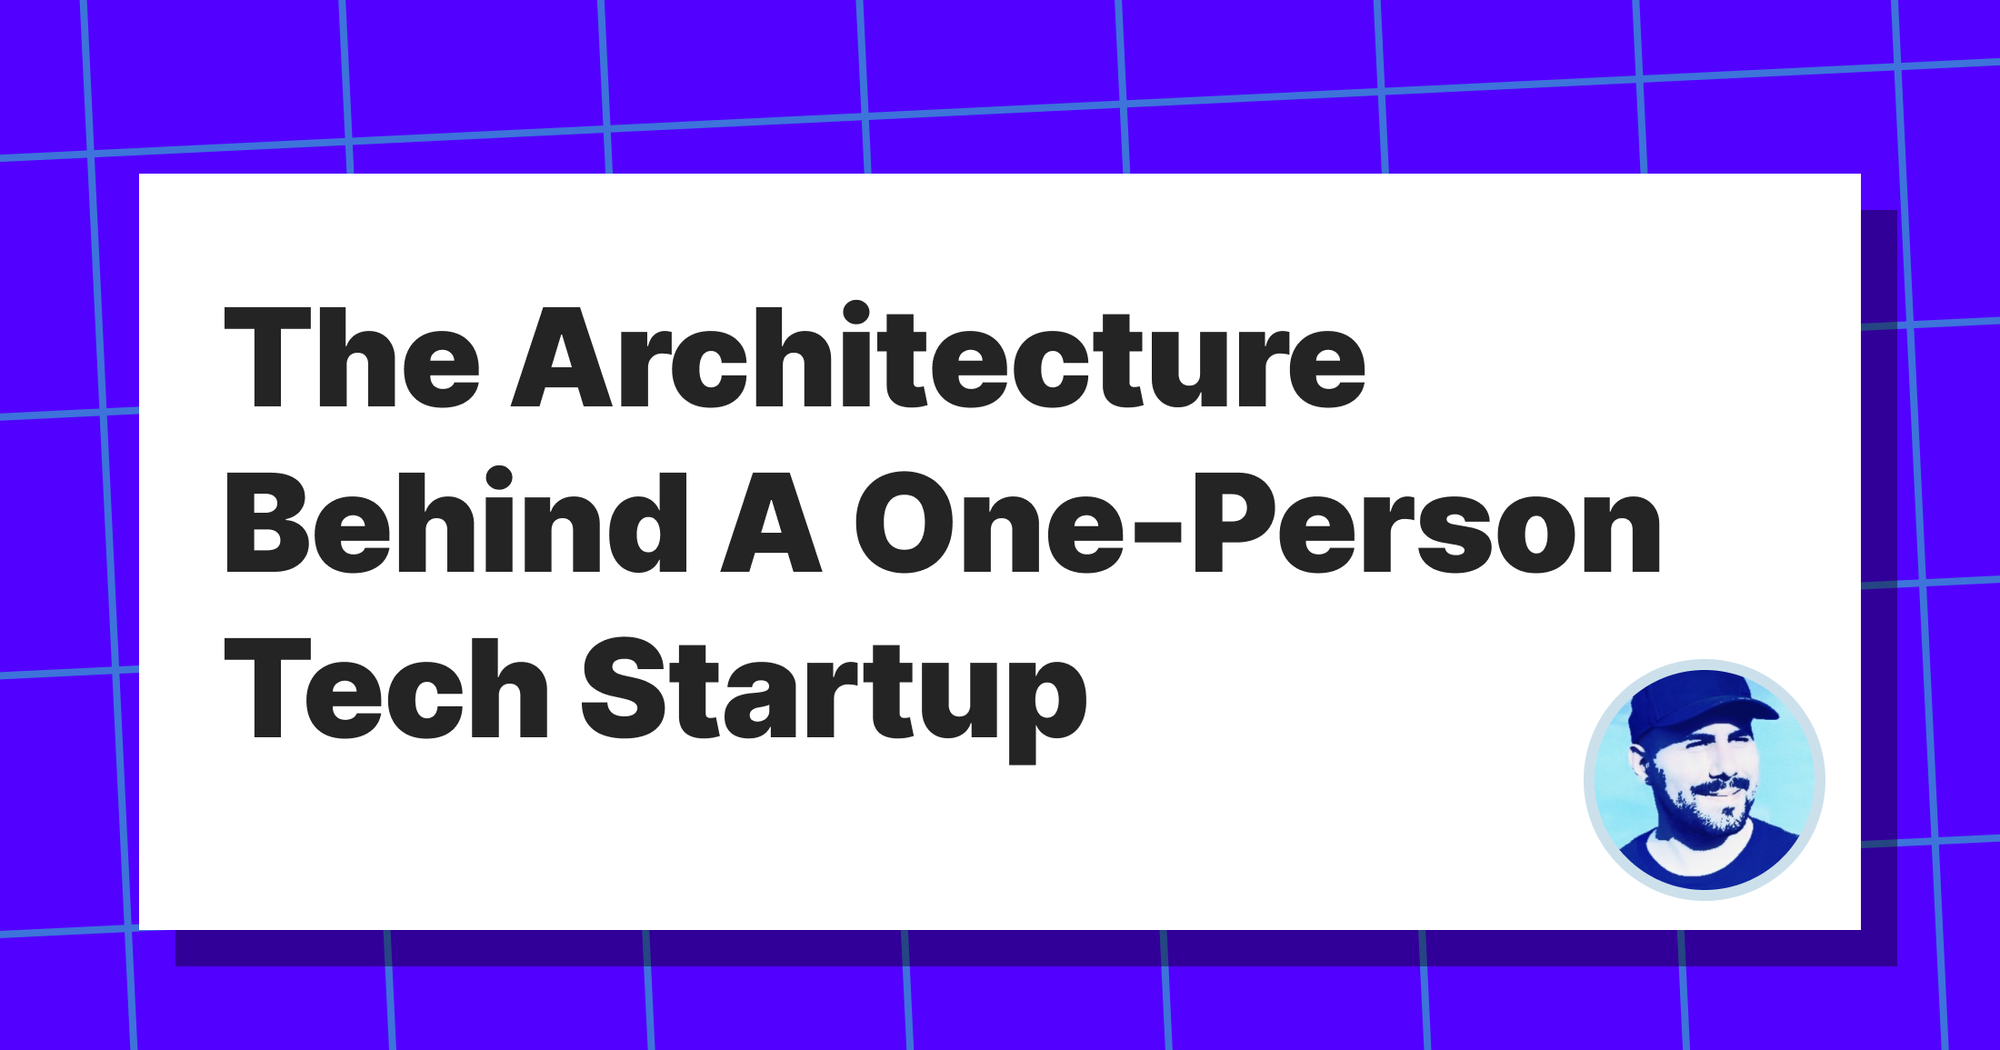 The Architecture Behind A One-Person Tech Startup